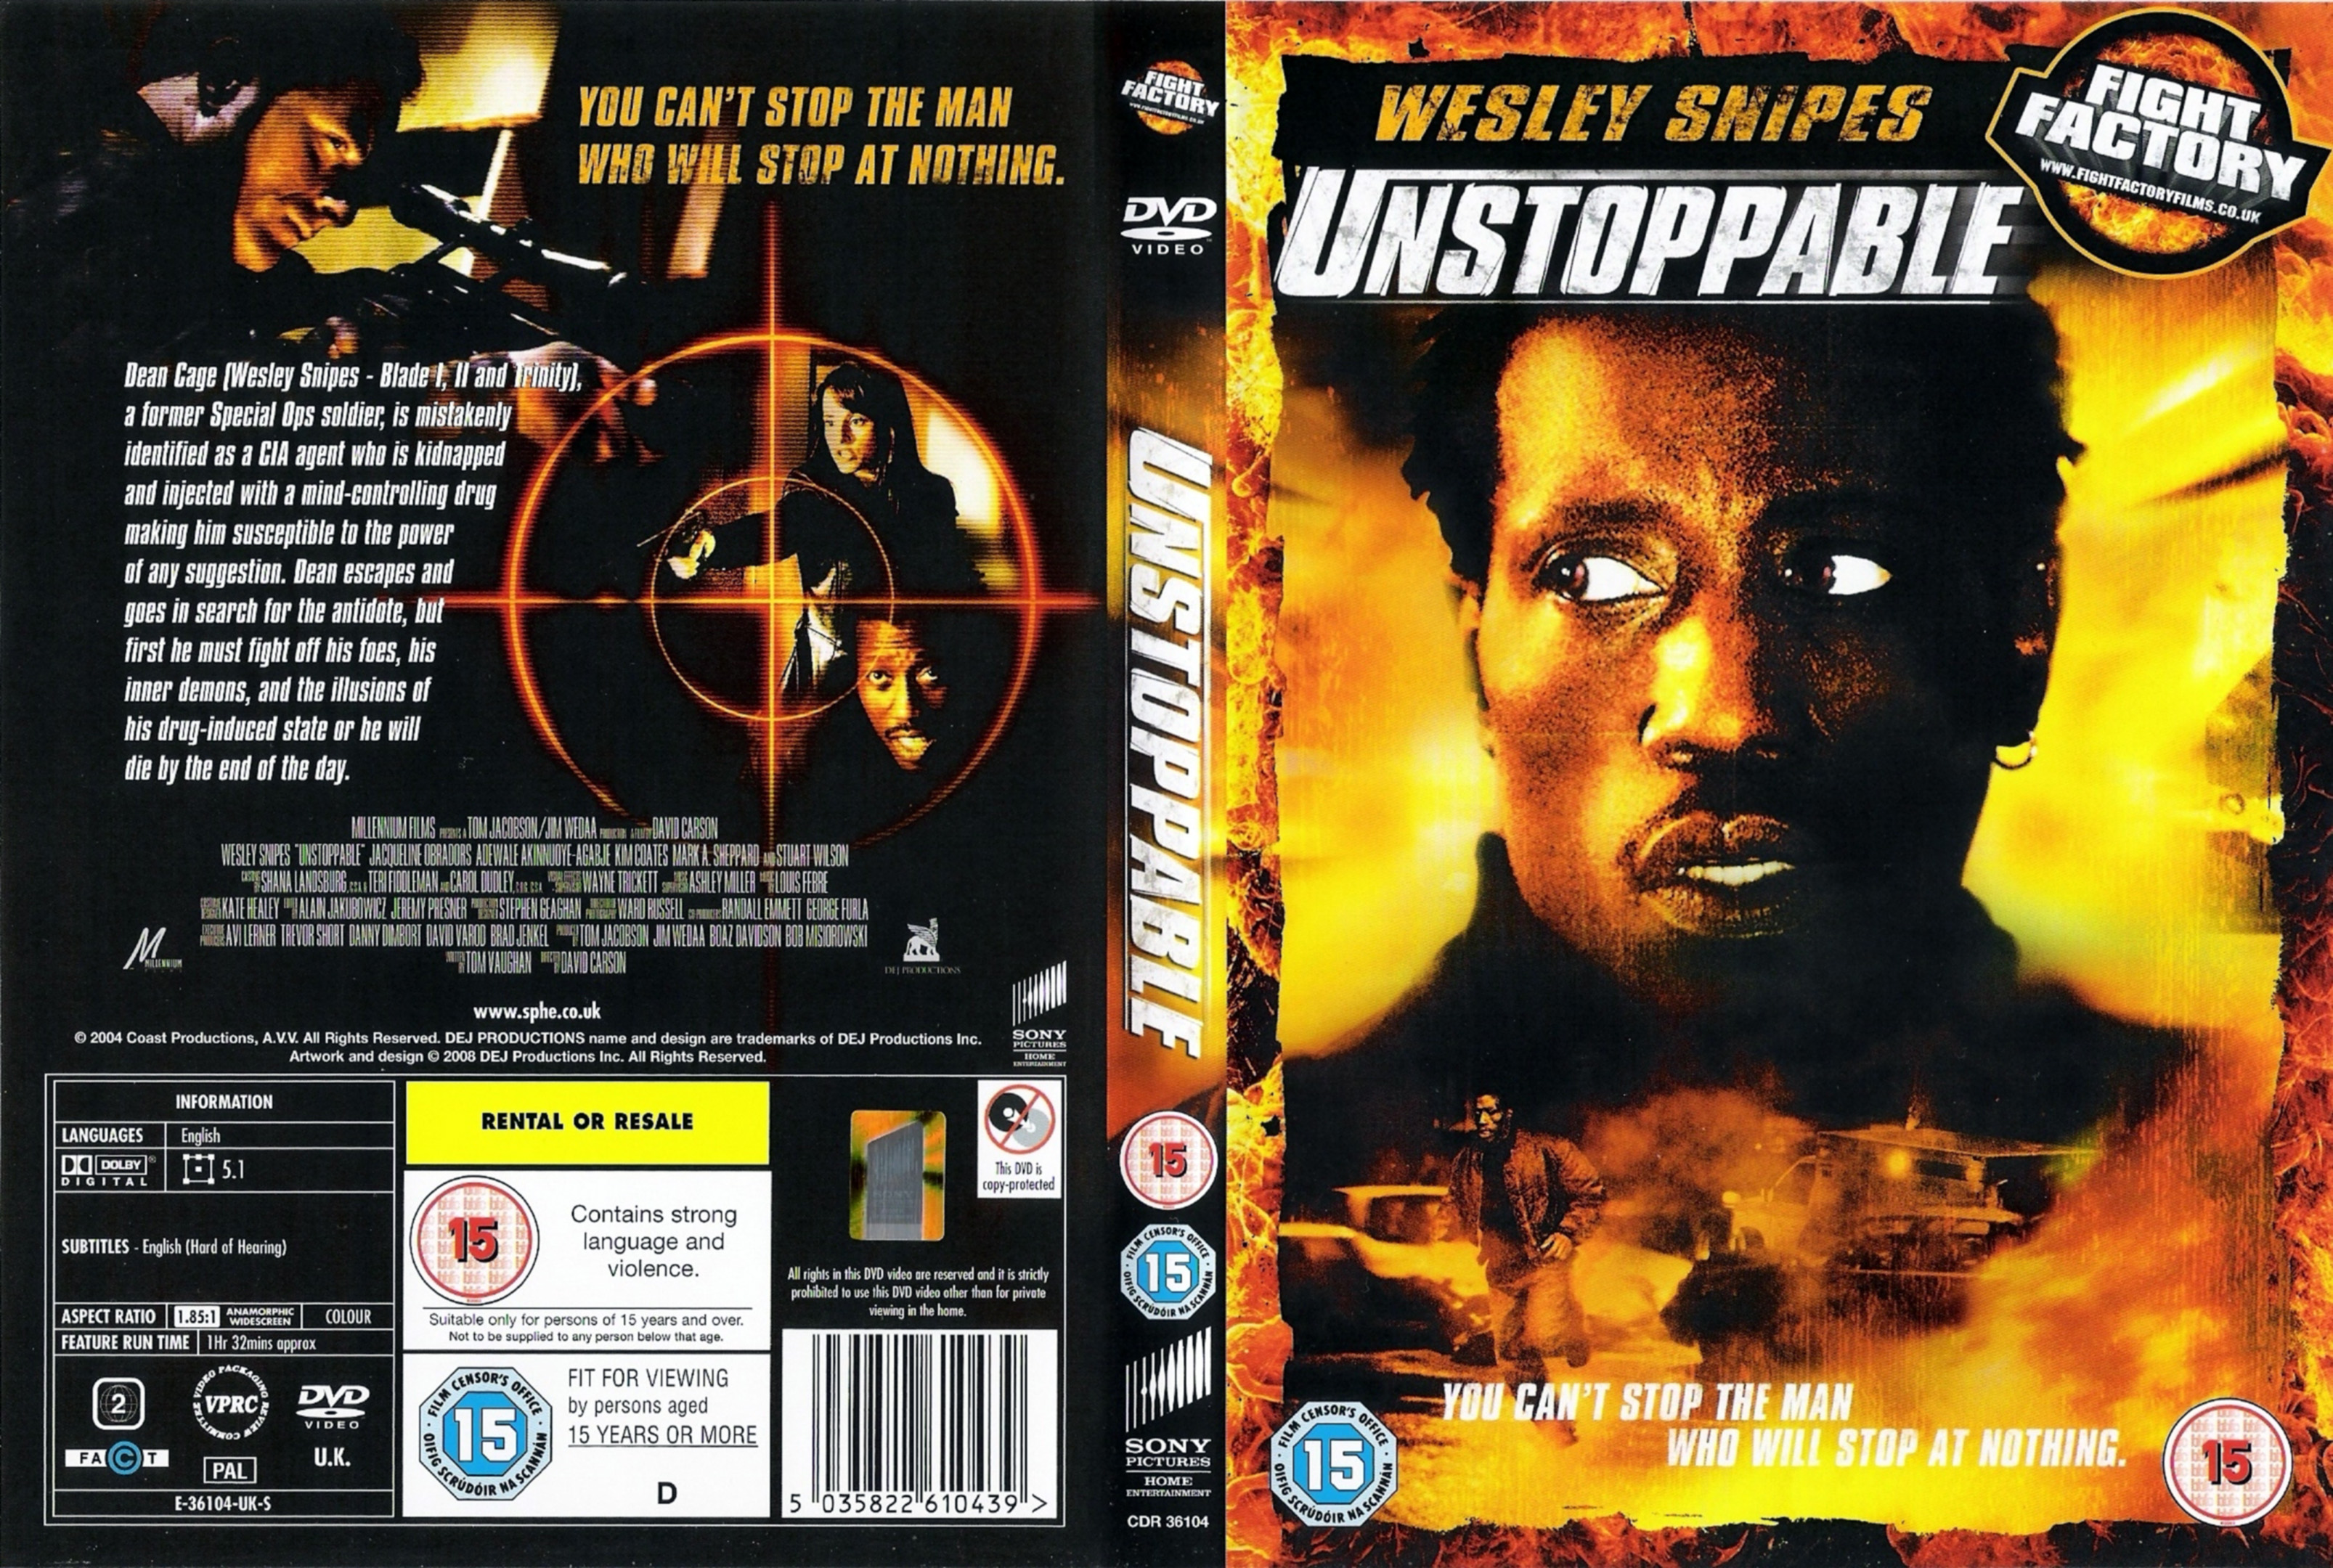 Jaquette DVD Unstoppable (2004) Zone 1